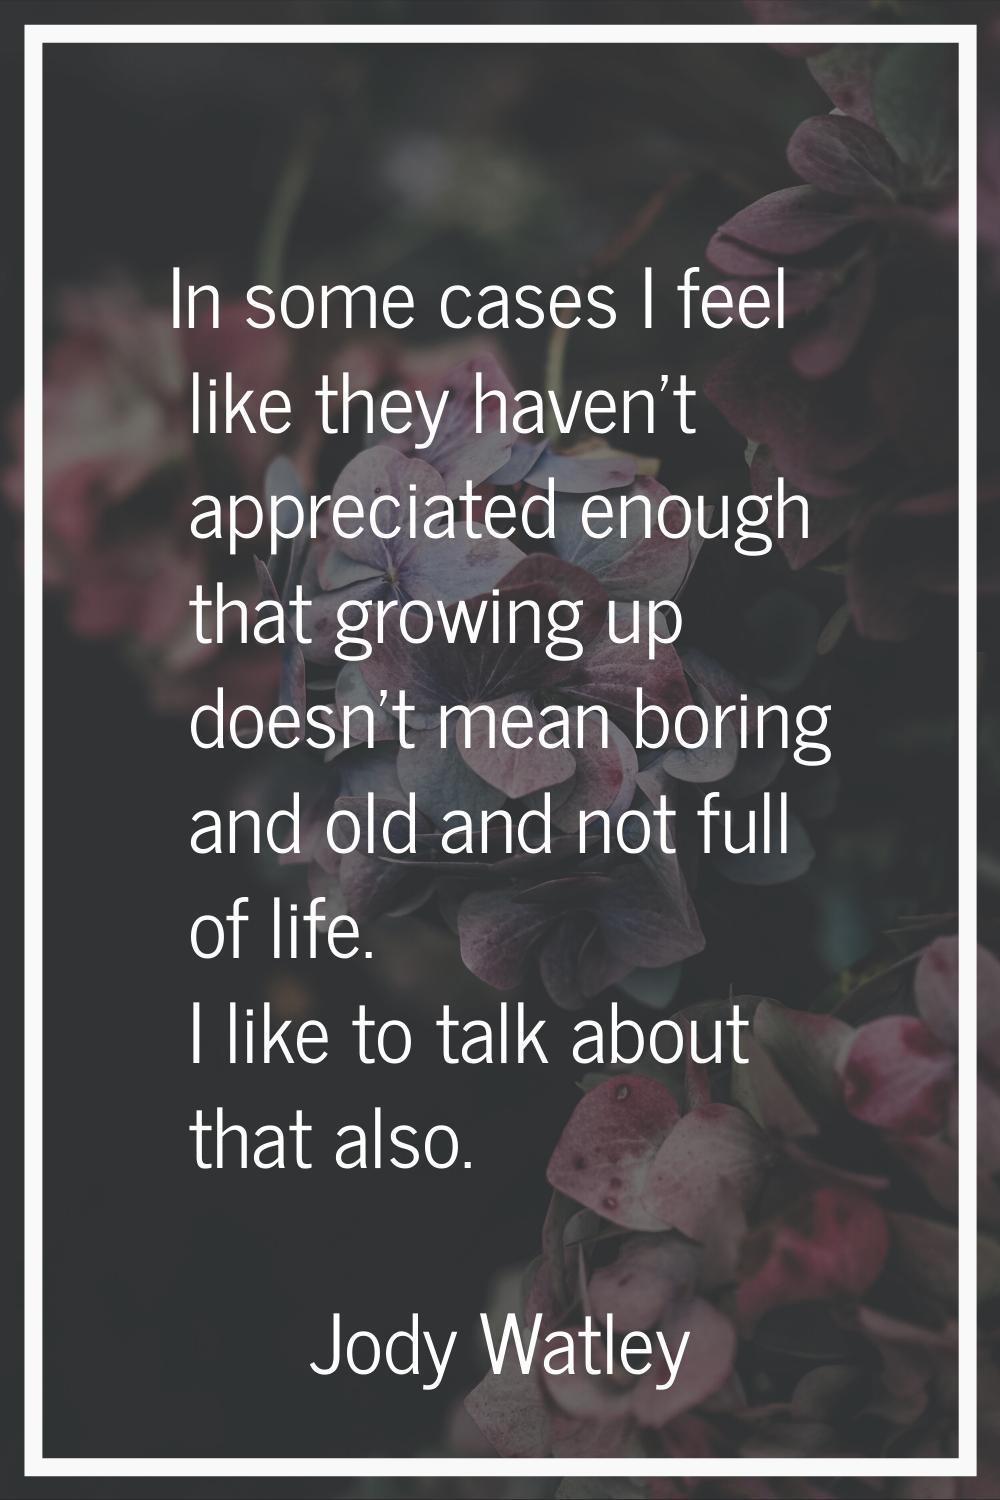 In some cases I feel like they haven't appreciated enough that growing up doesn't mean boring and o